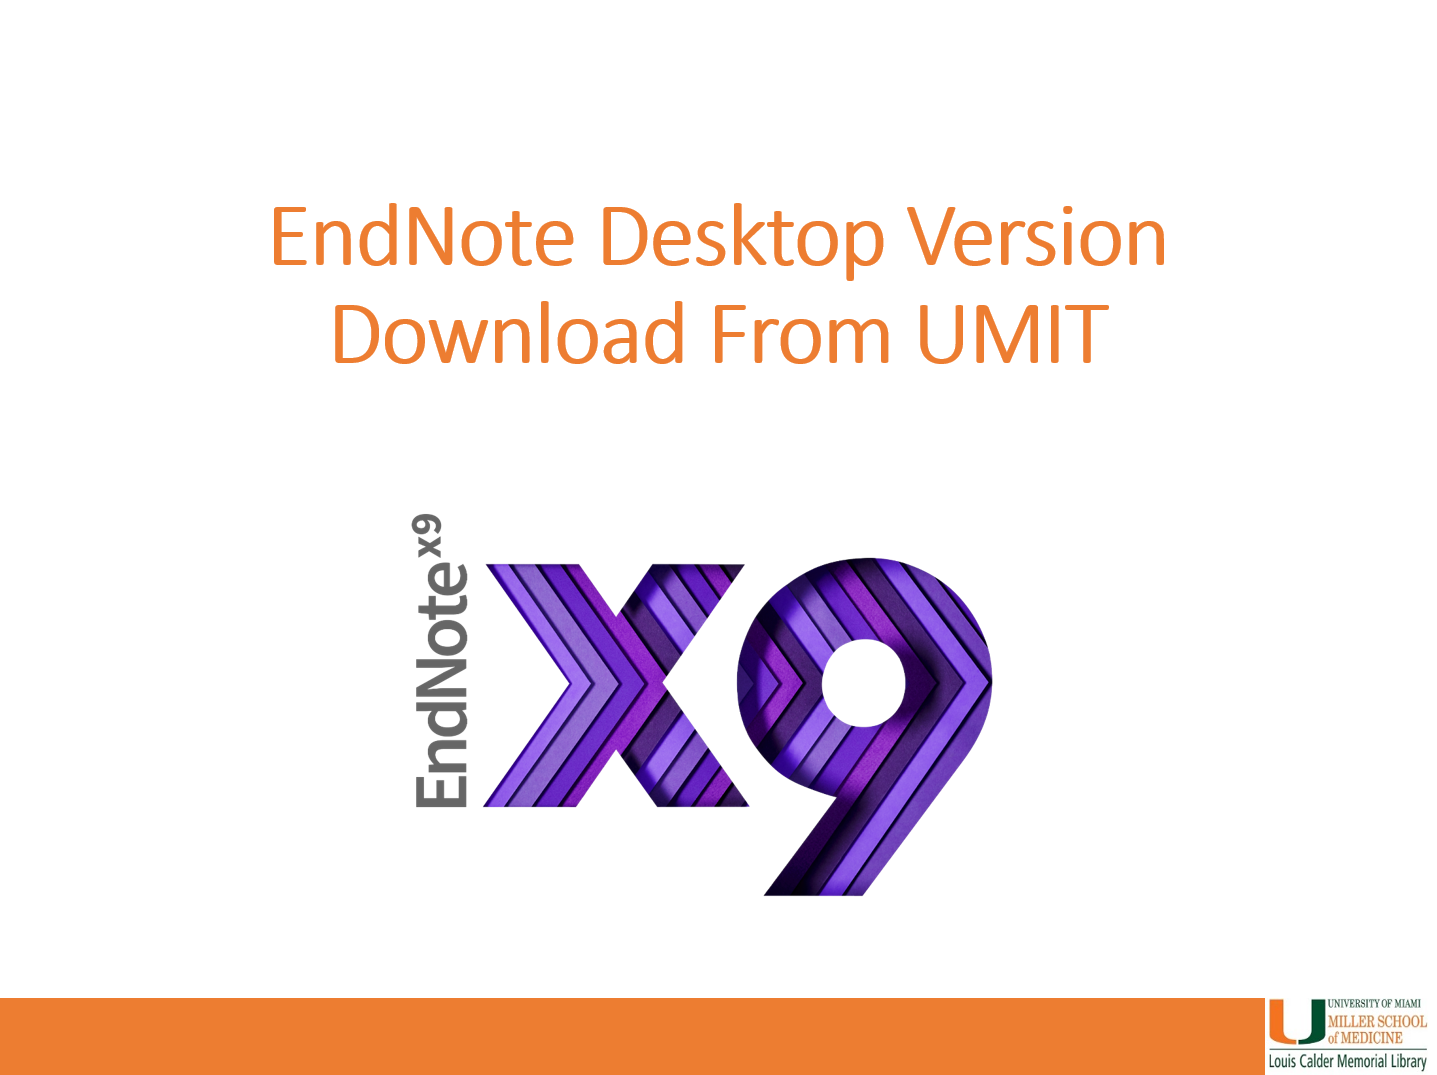 endnote basic uw health library